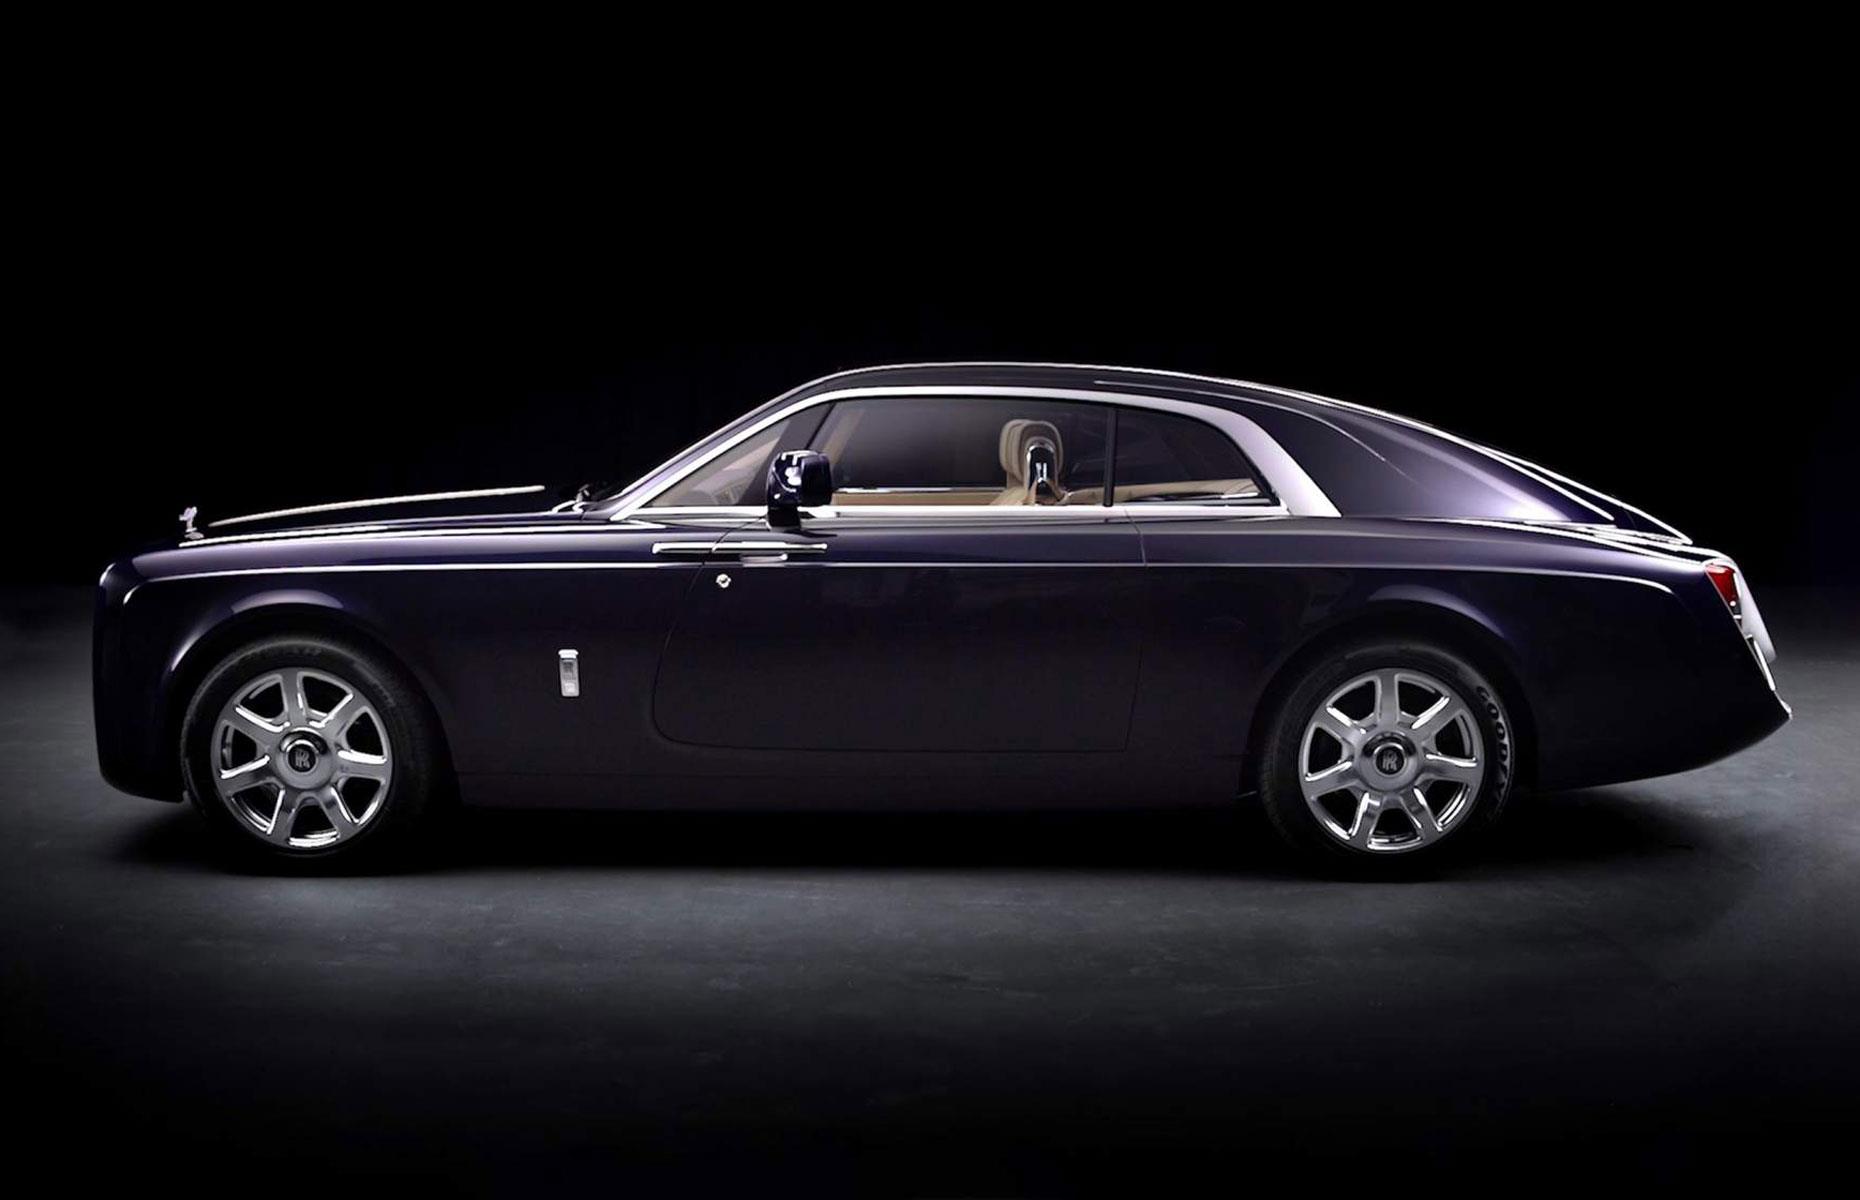 Unveiled in 2017 to much fanfare, the Rolls-Royce Sweptail is a one-off two-seater that was commissioned for a mystery billionaire, who is reported to have splashed out $13 million (£10.6m) for the unique vehicle. Needless to say, the Sweptail was the most expensive new car ever produced, but didn't hold on to the record for long.